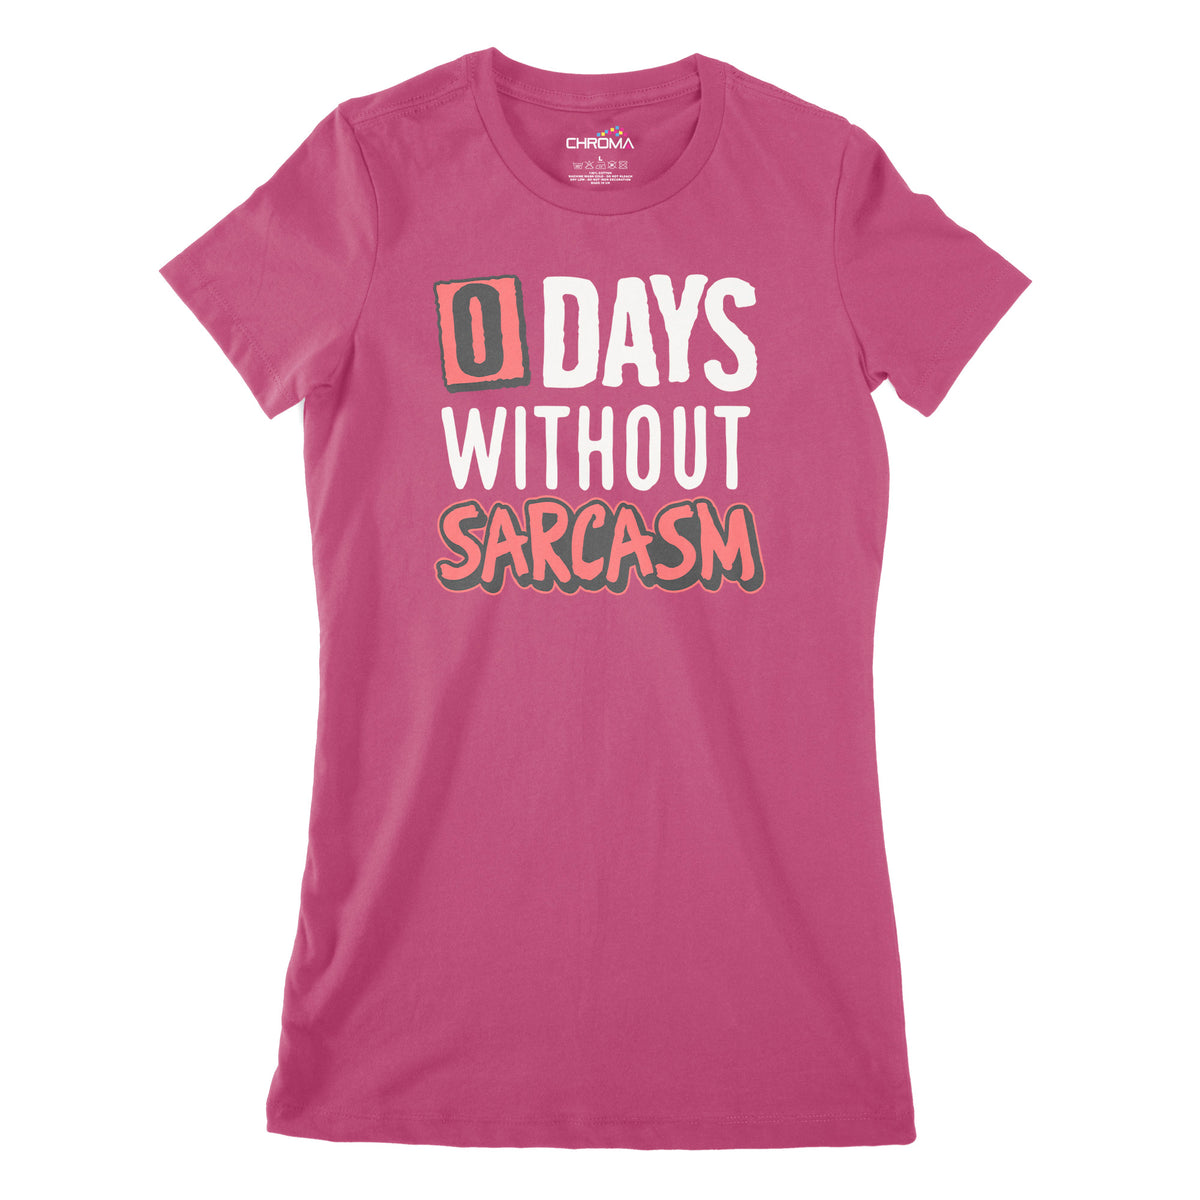 0 Days Without Sarcasm | Women's Classic Fitted T-Shirt Chroma Clothing